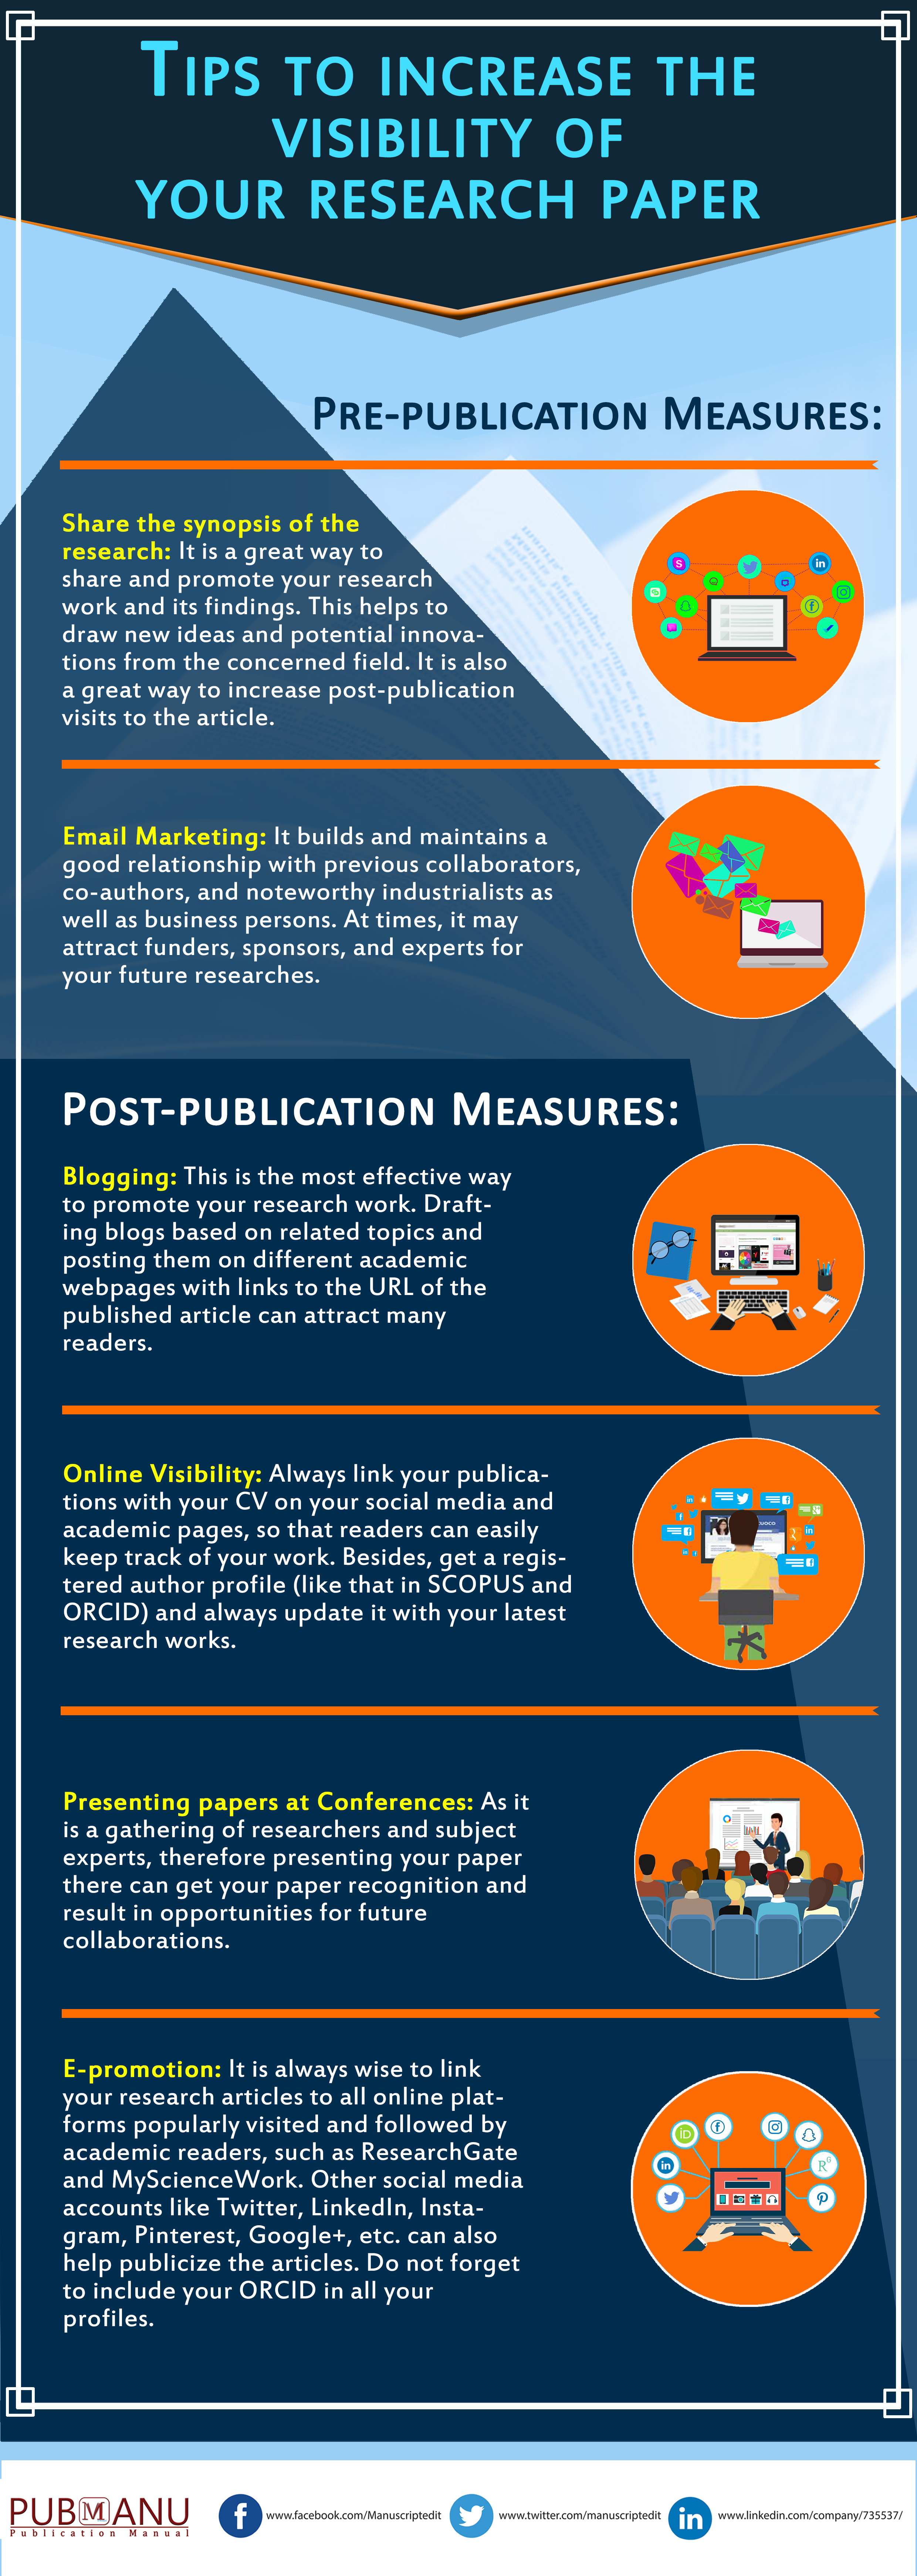 Tips to increase the visibility of your research paper